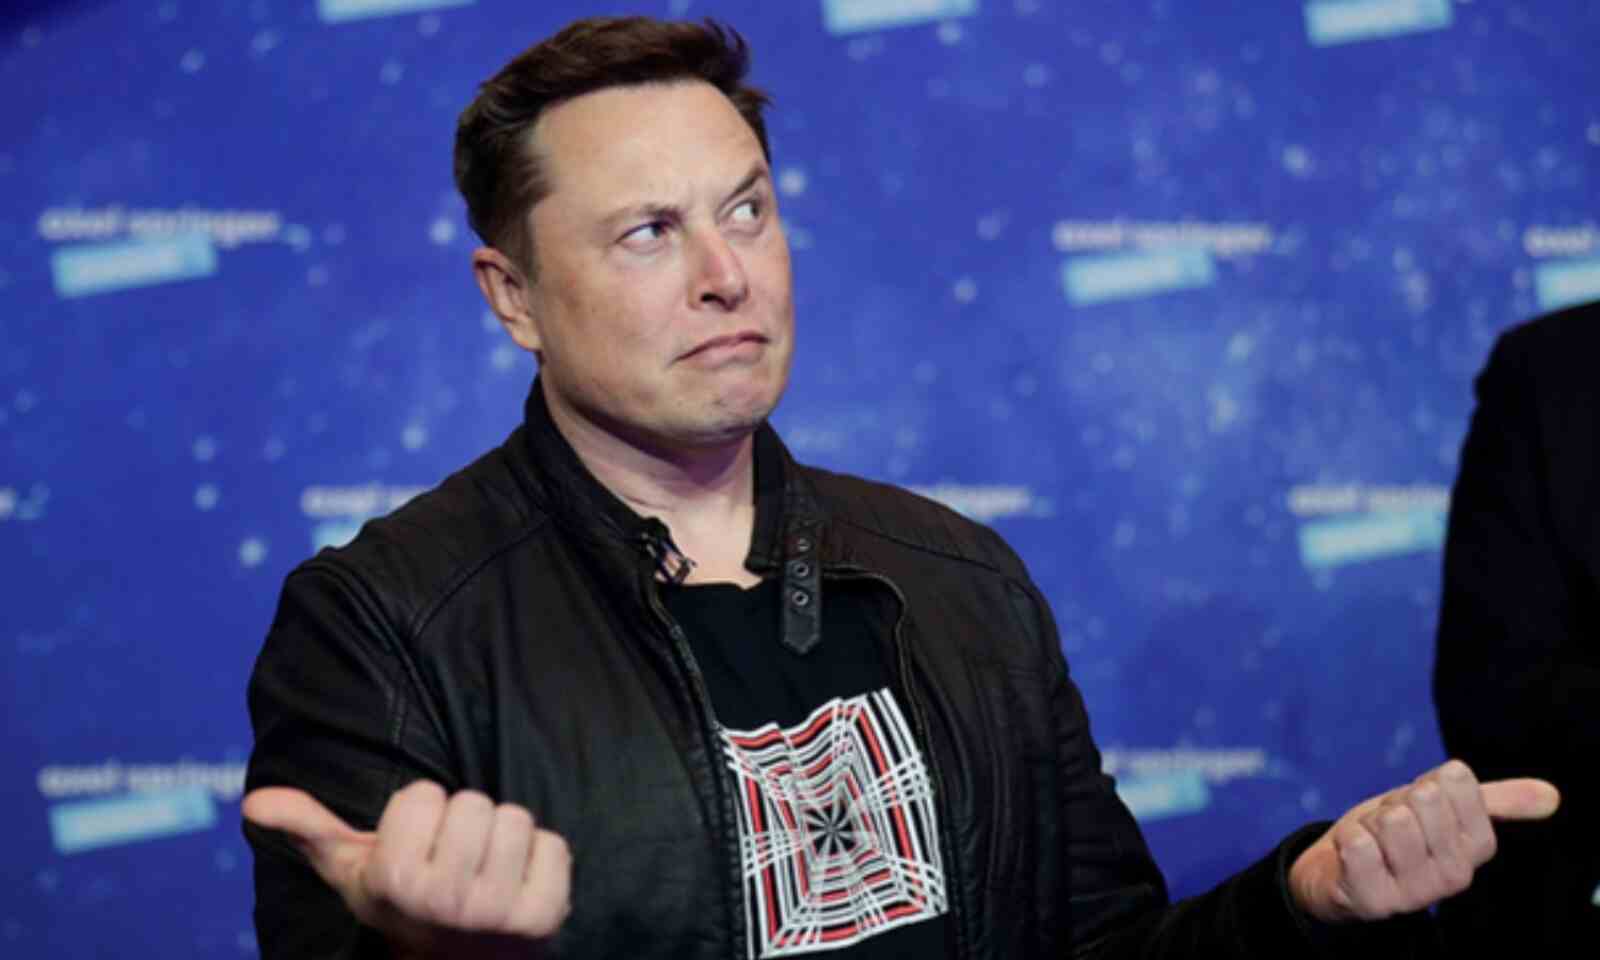 Chess is too simple, says Elon Musk